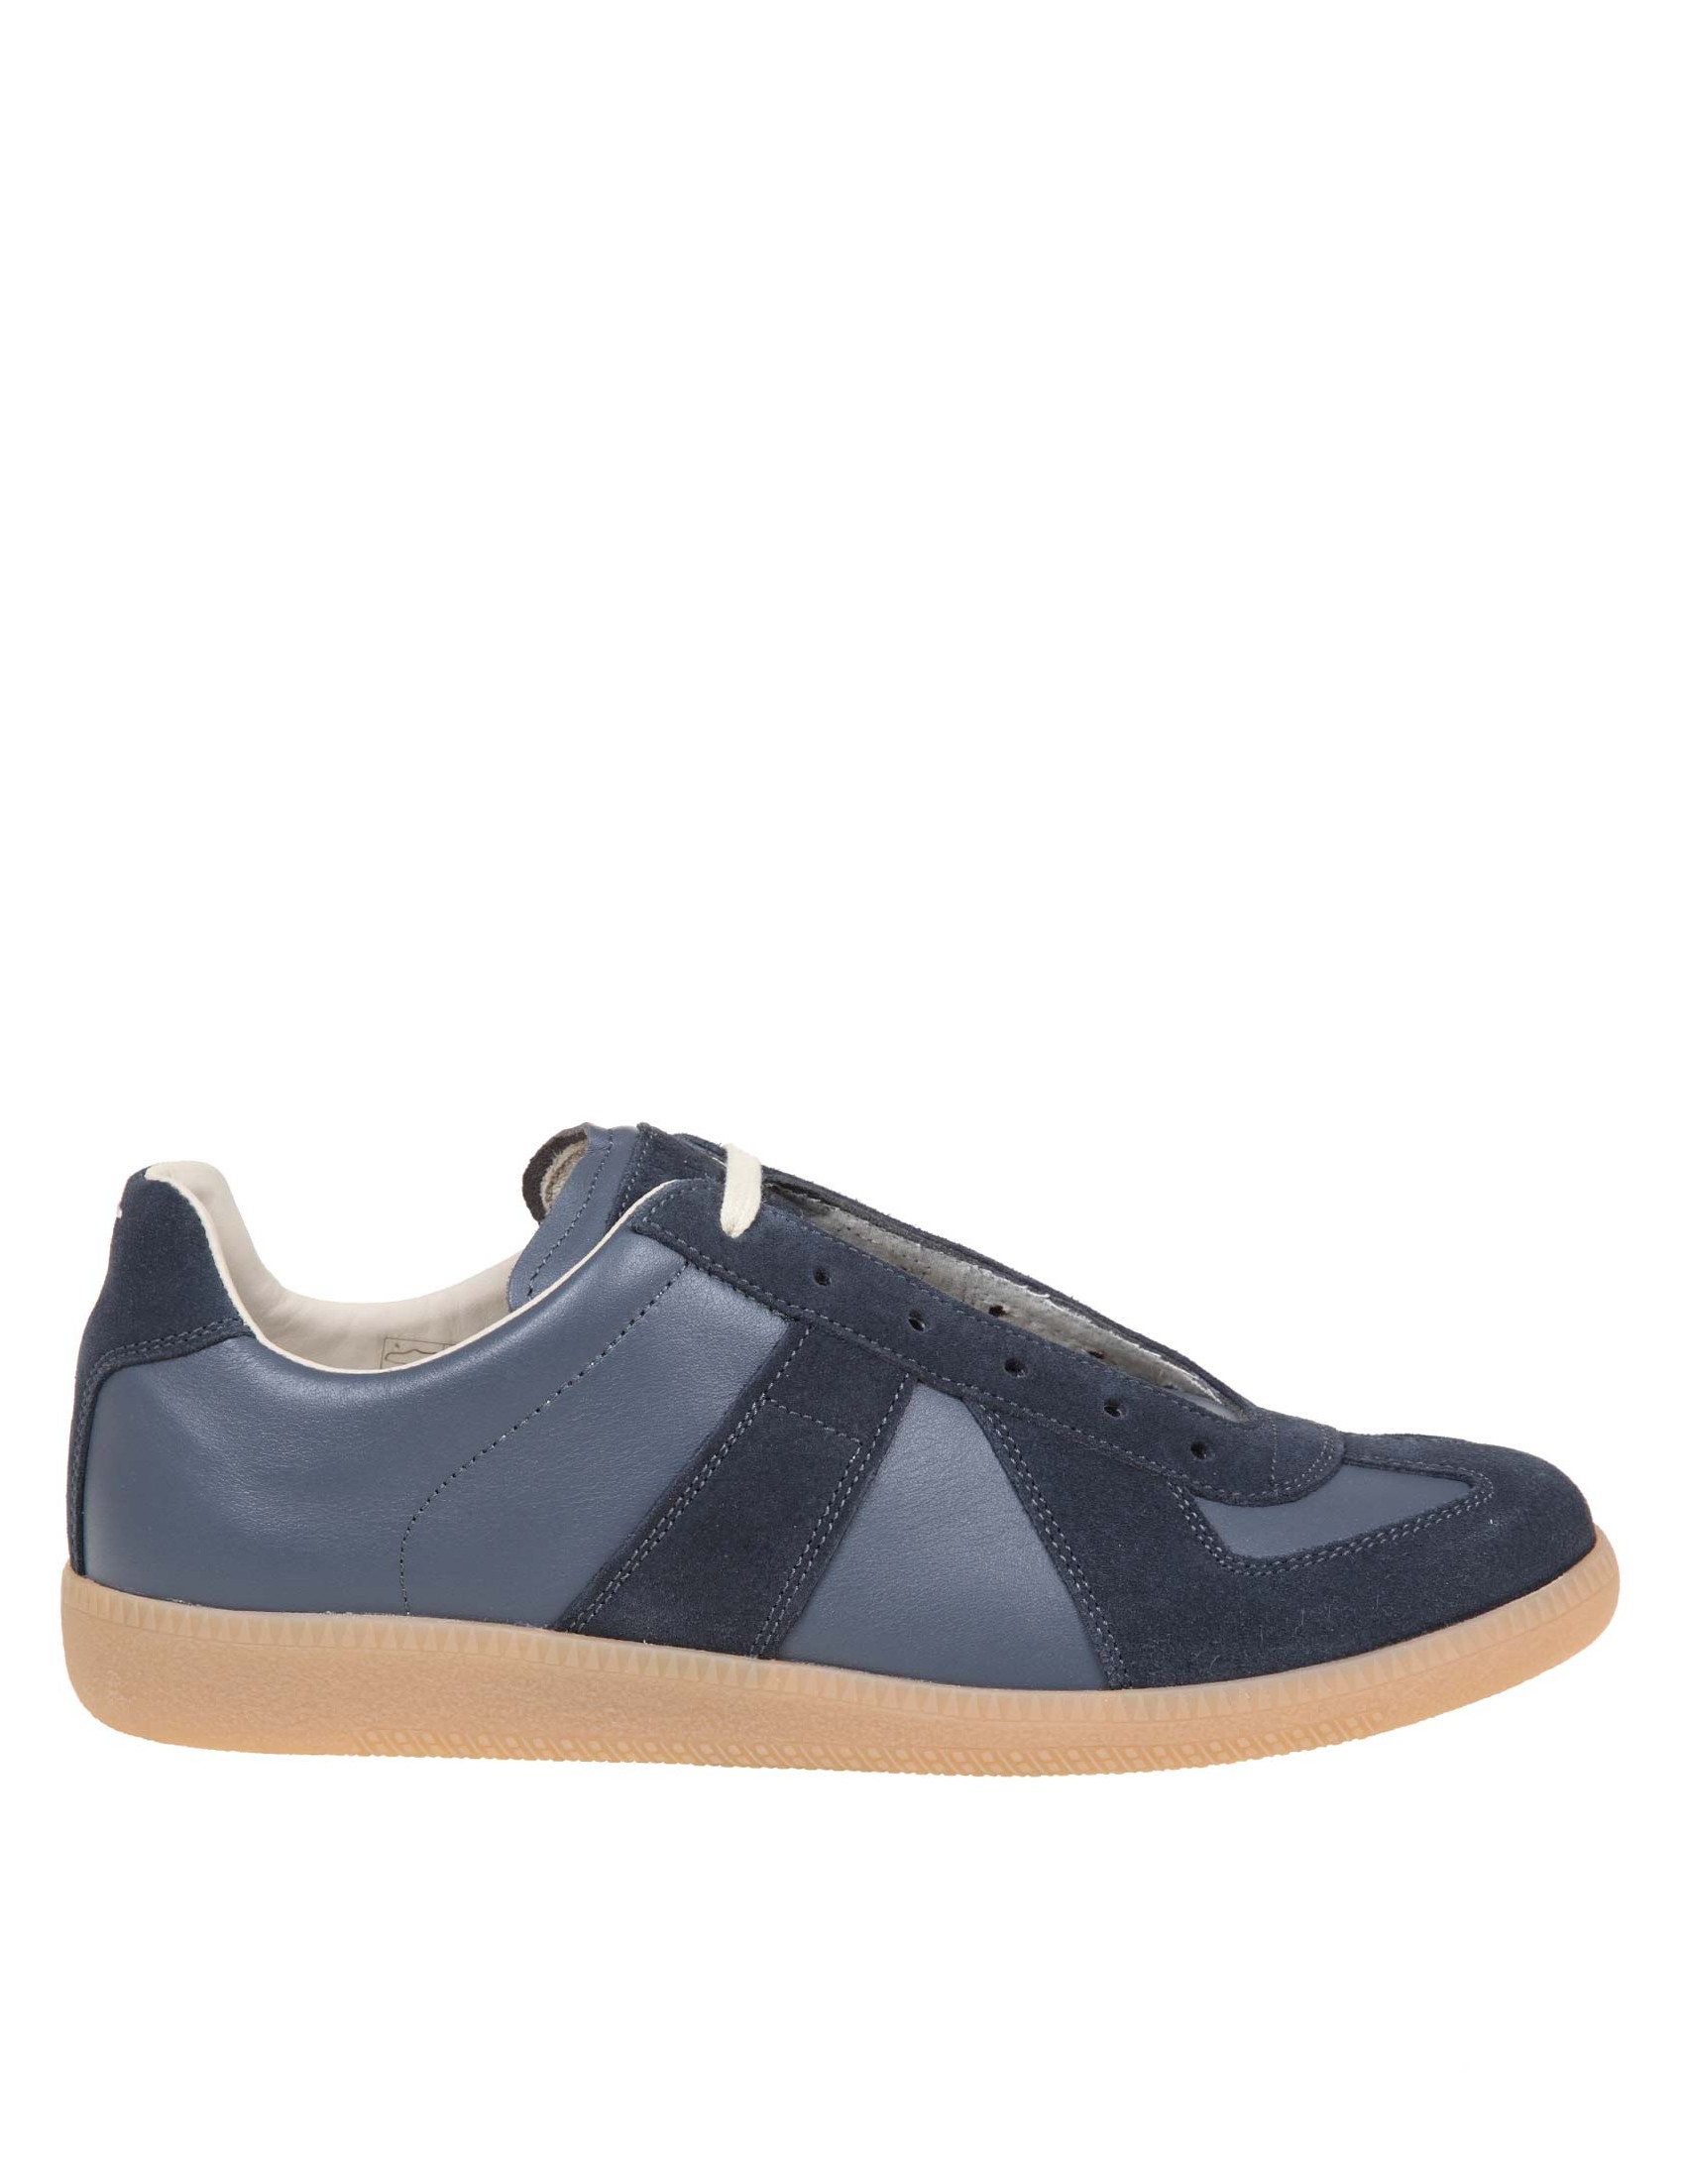 MAISON MARGIELA SNEAKERS REPLICA IN LEATHER AND SUEDE COLOR BLUE